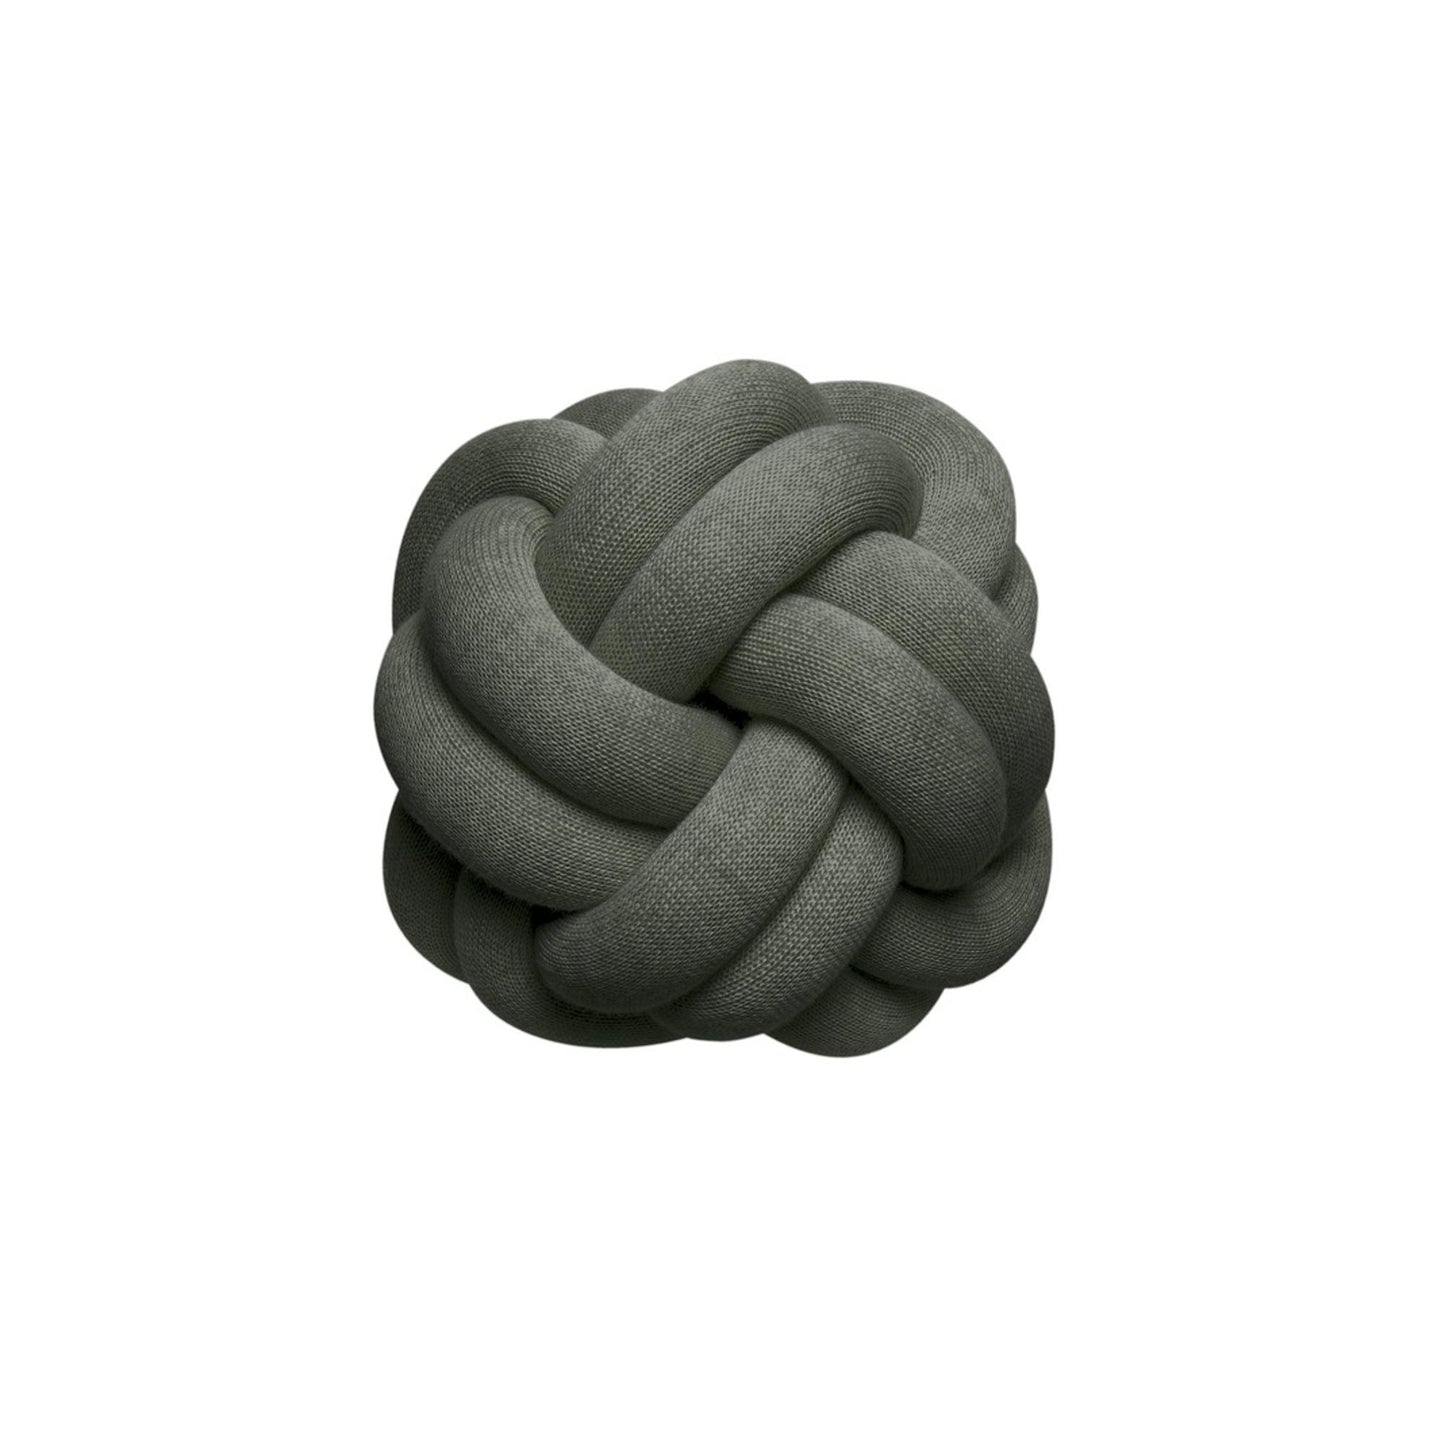 Knot Cushion by Design House Stockholm #Forest Green